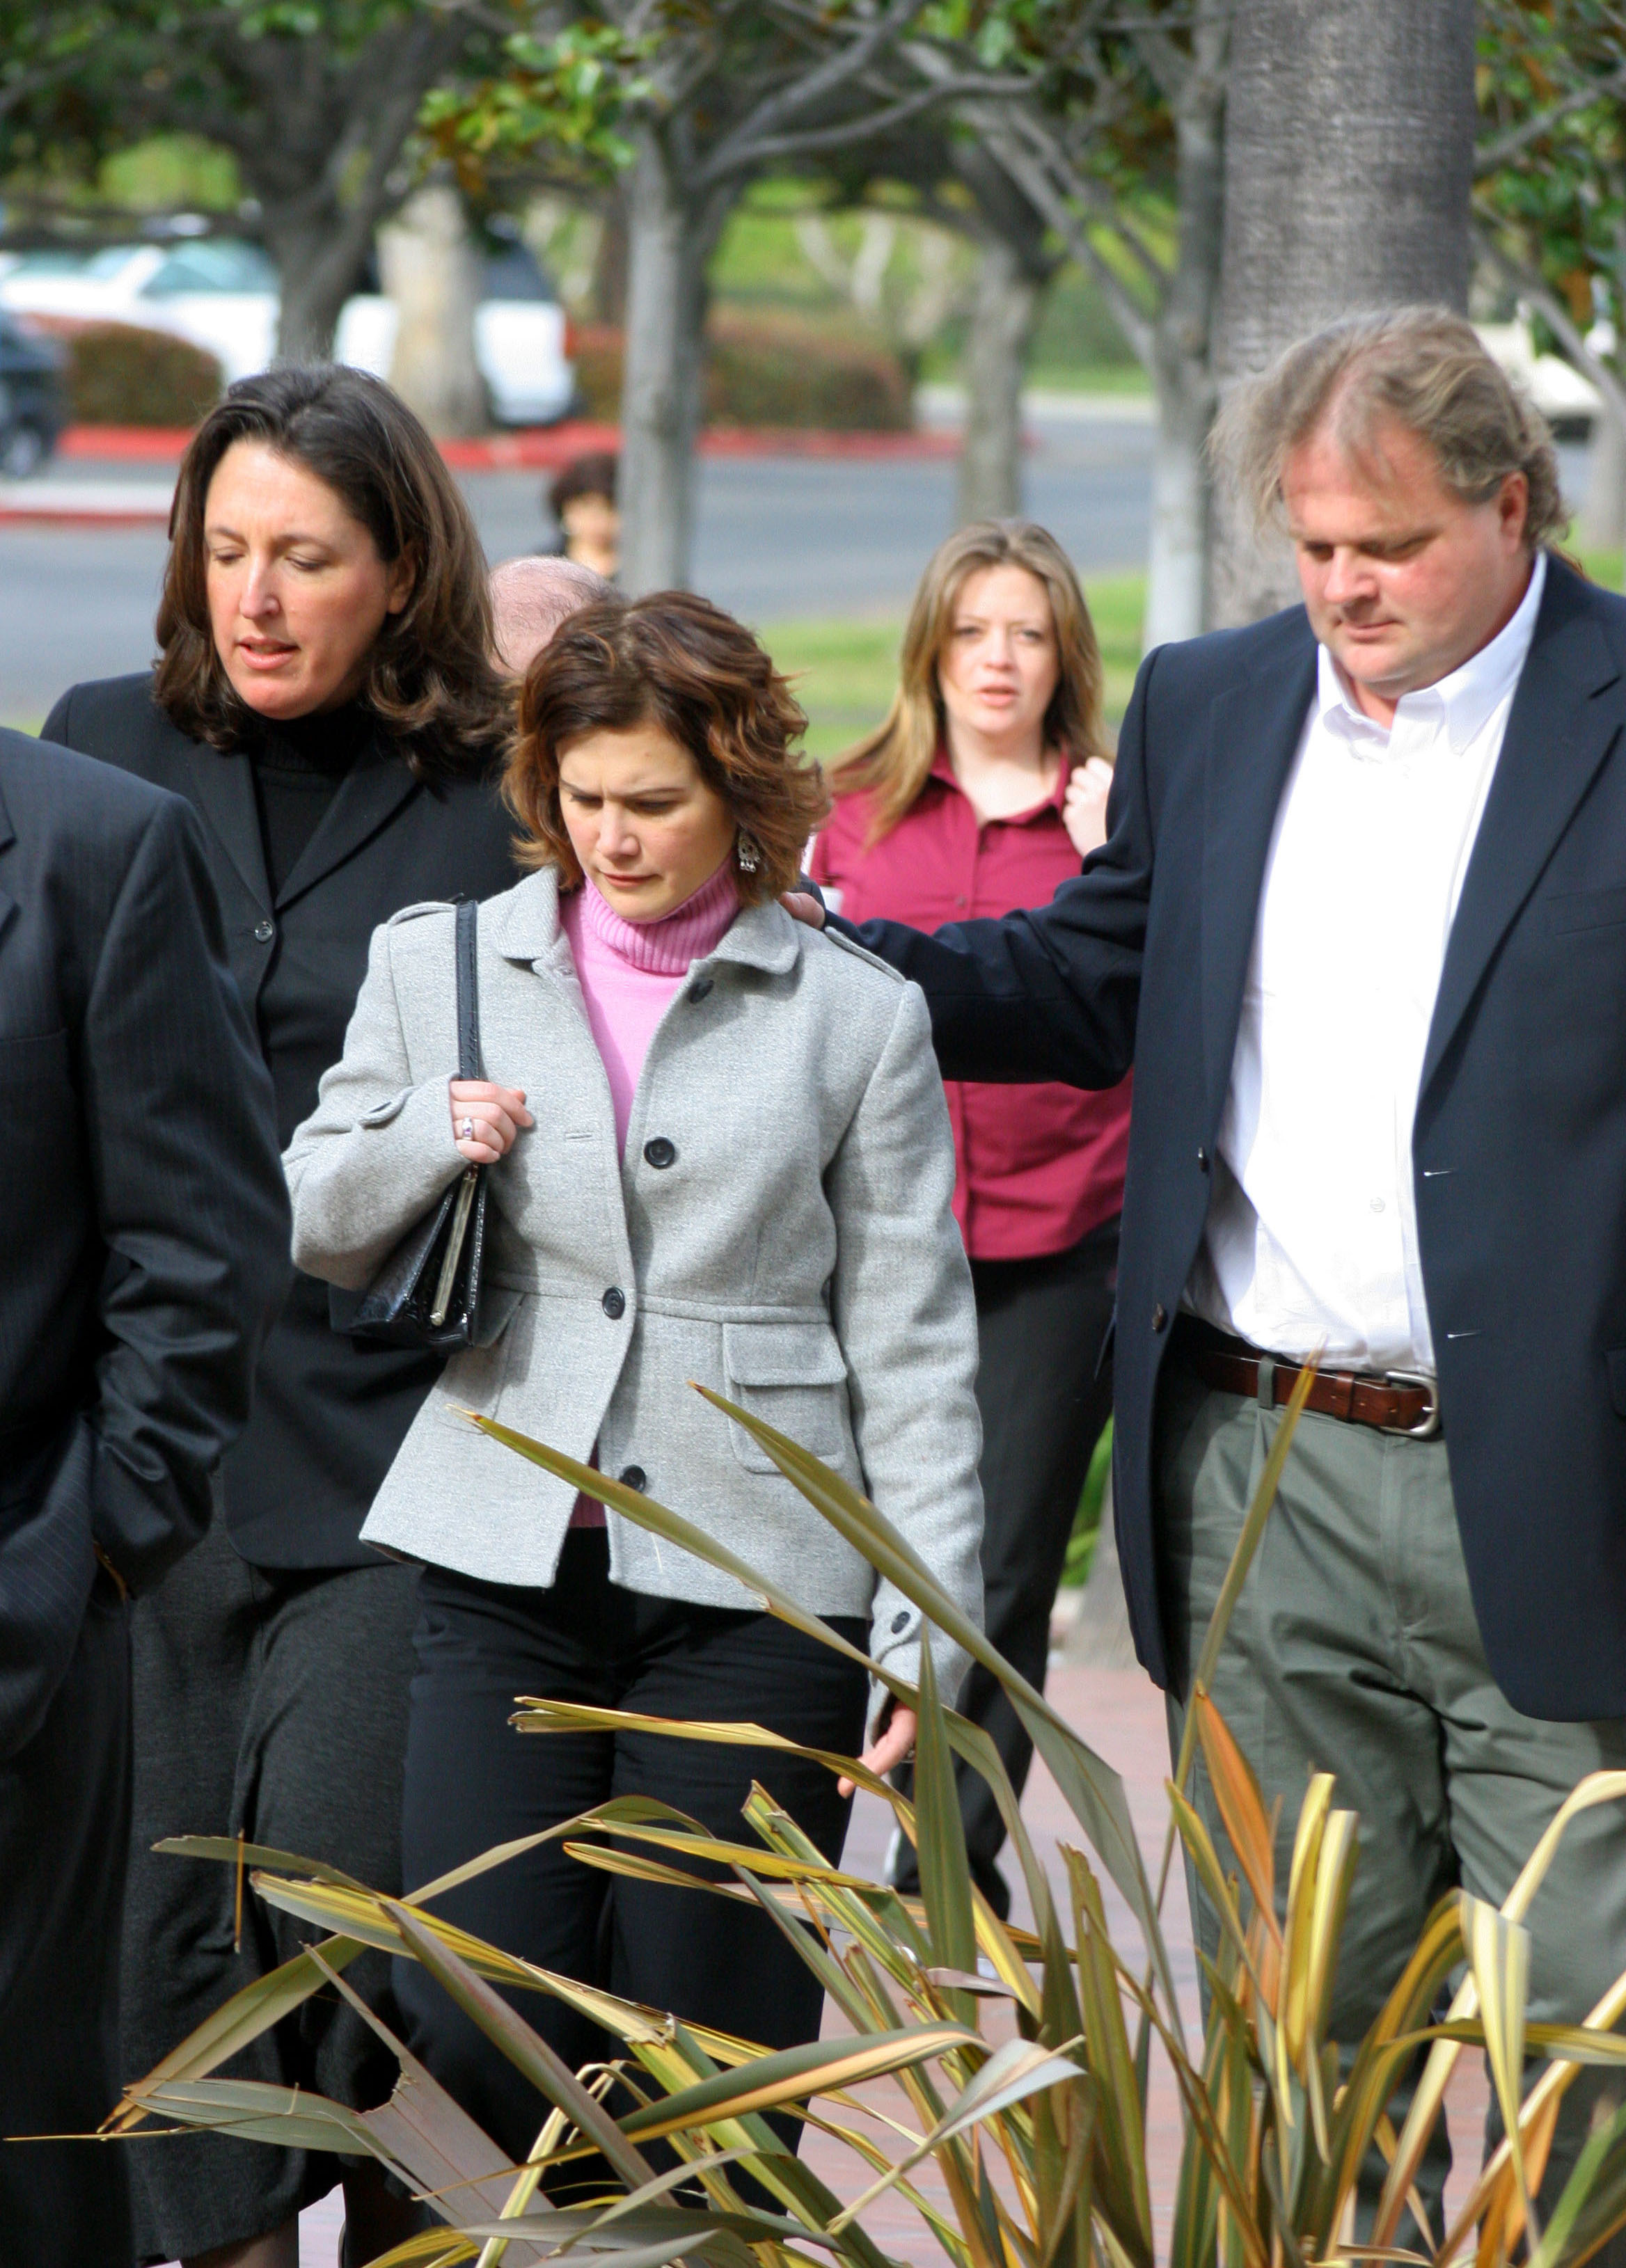 Defense attorney Blair Berk, Tracey Gold, and her husband Roby Marshall at the Ventura Hall of Justice for a court appearance on January 6, 2005, in Ventura, California. | Source: Getty Images